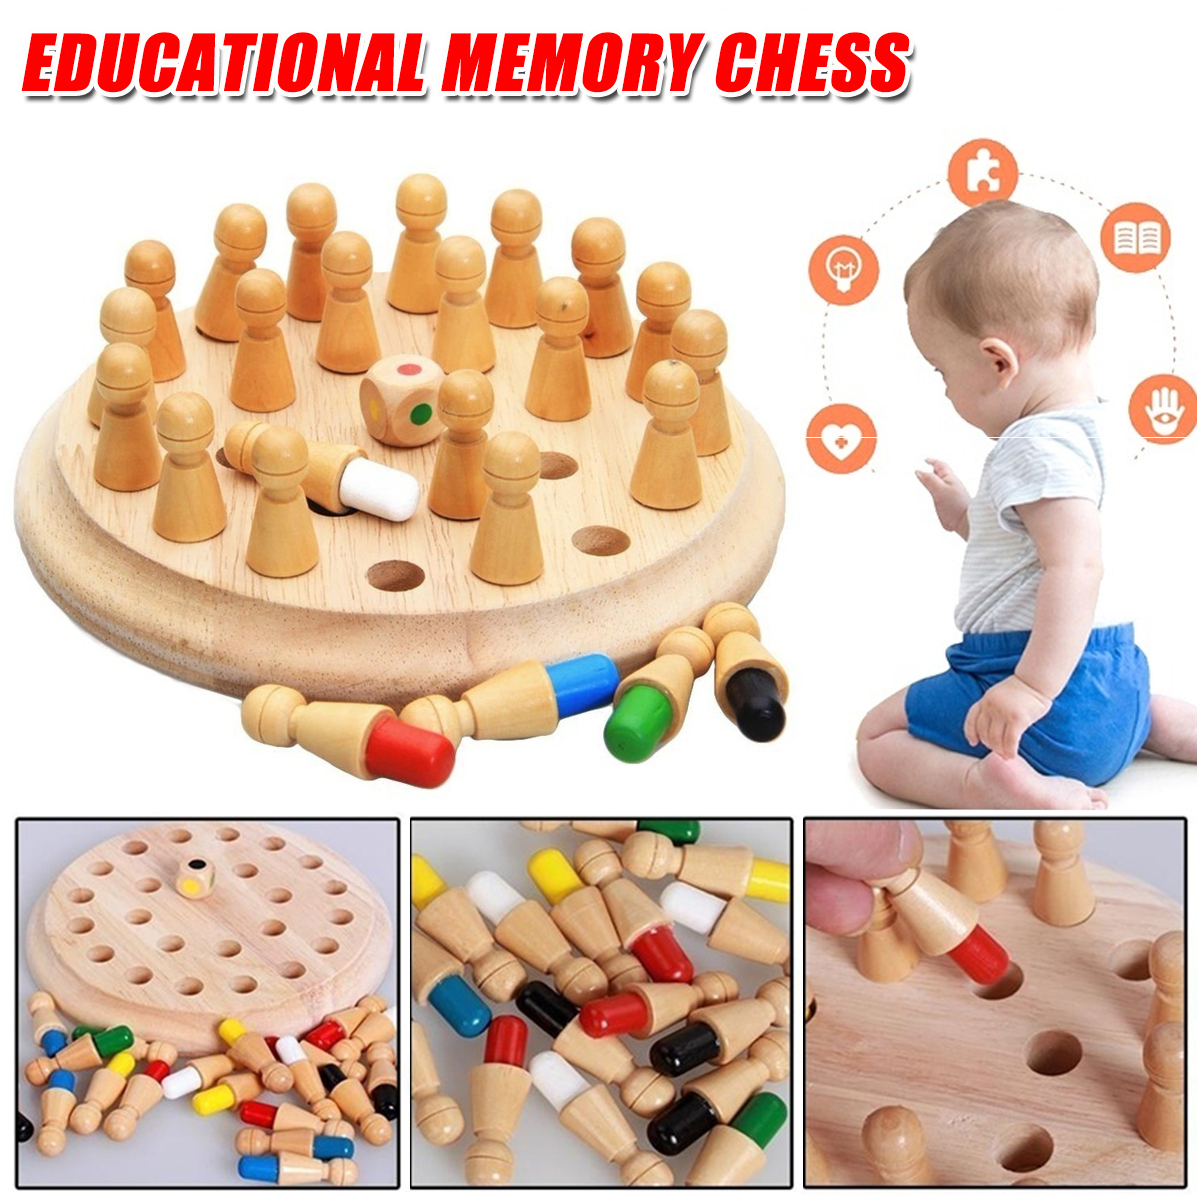 Montessori-Wooden-Colorful-Memory-Chess-Game-Clip-Beads-3D-Puzzle-Learning-Educational-Toys-for-Chil-1723192-2